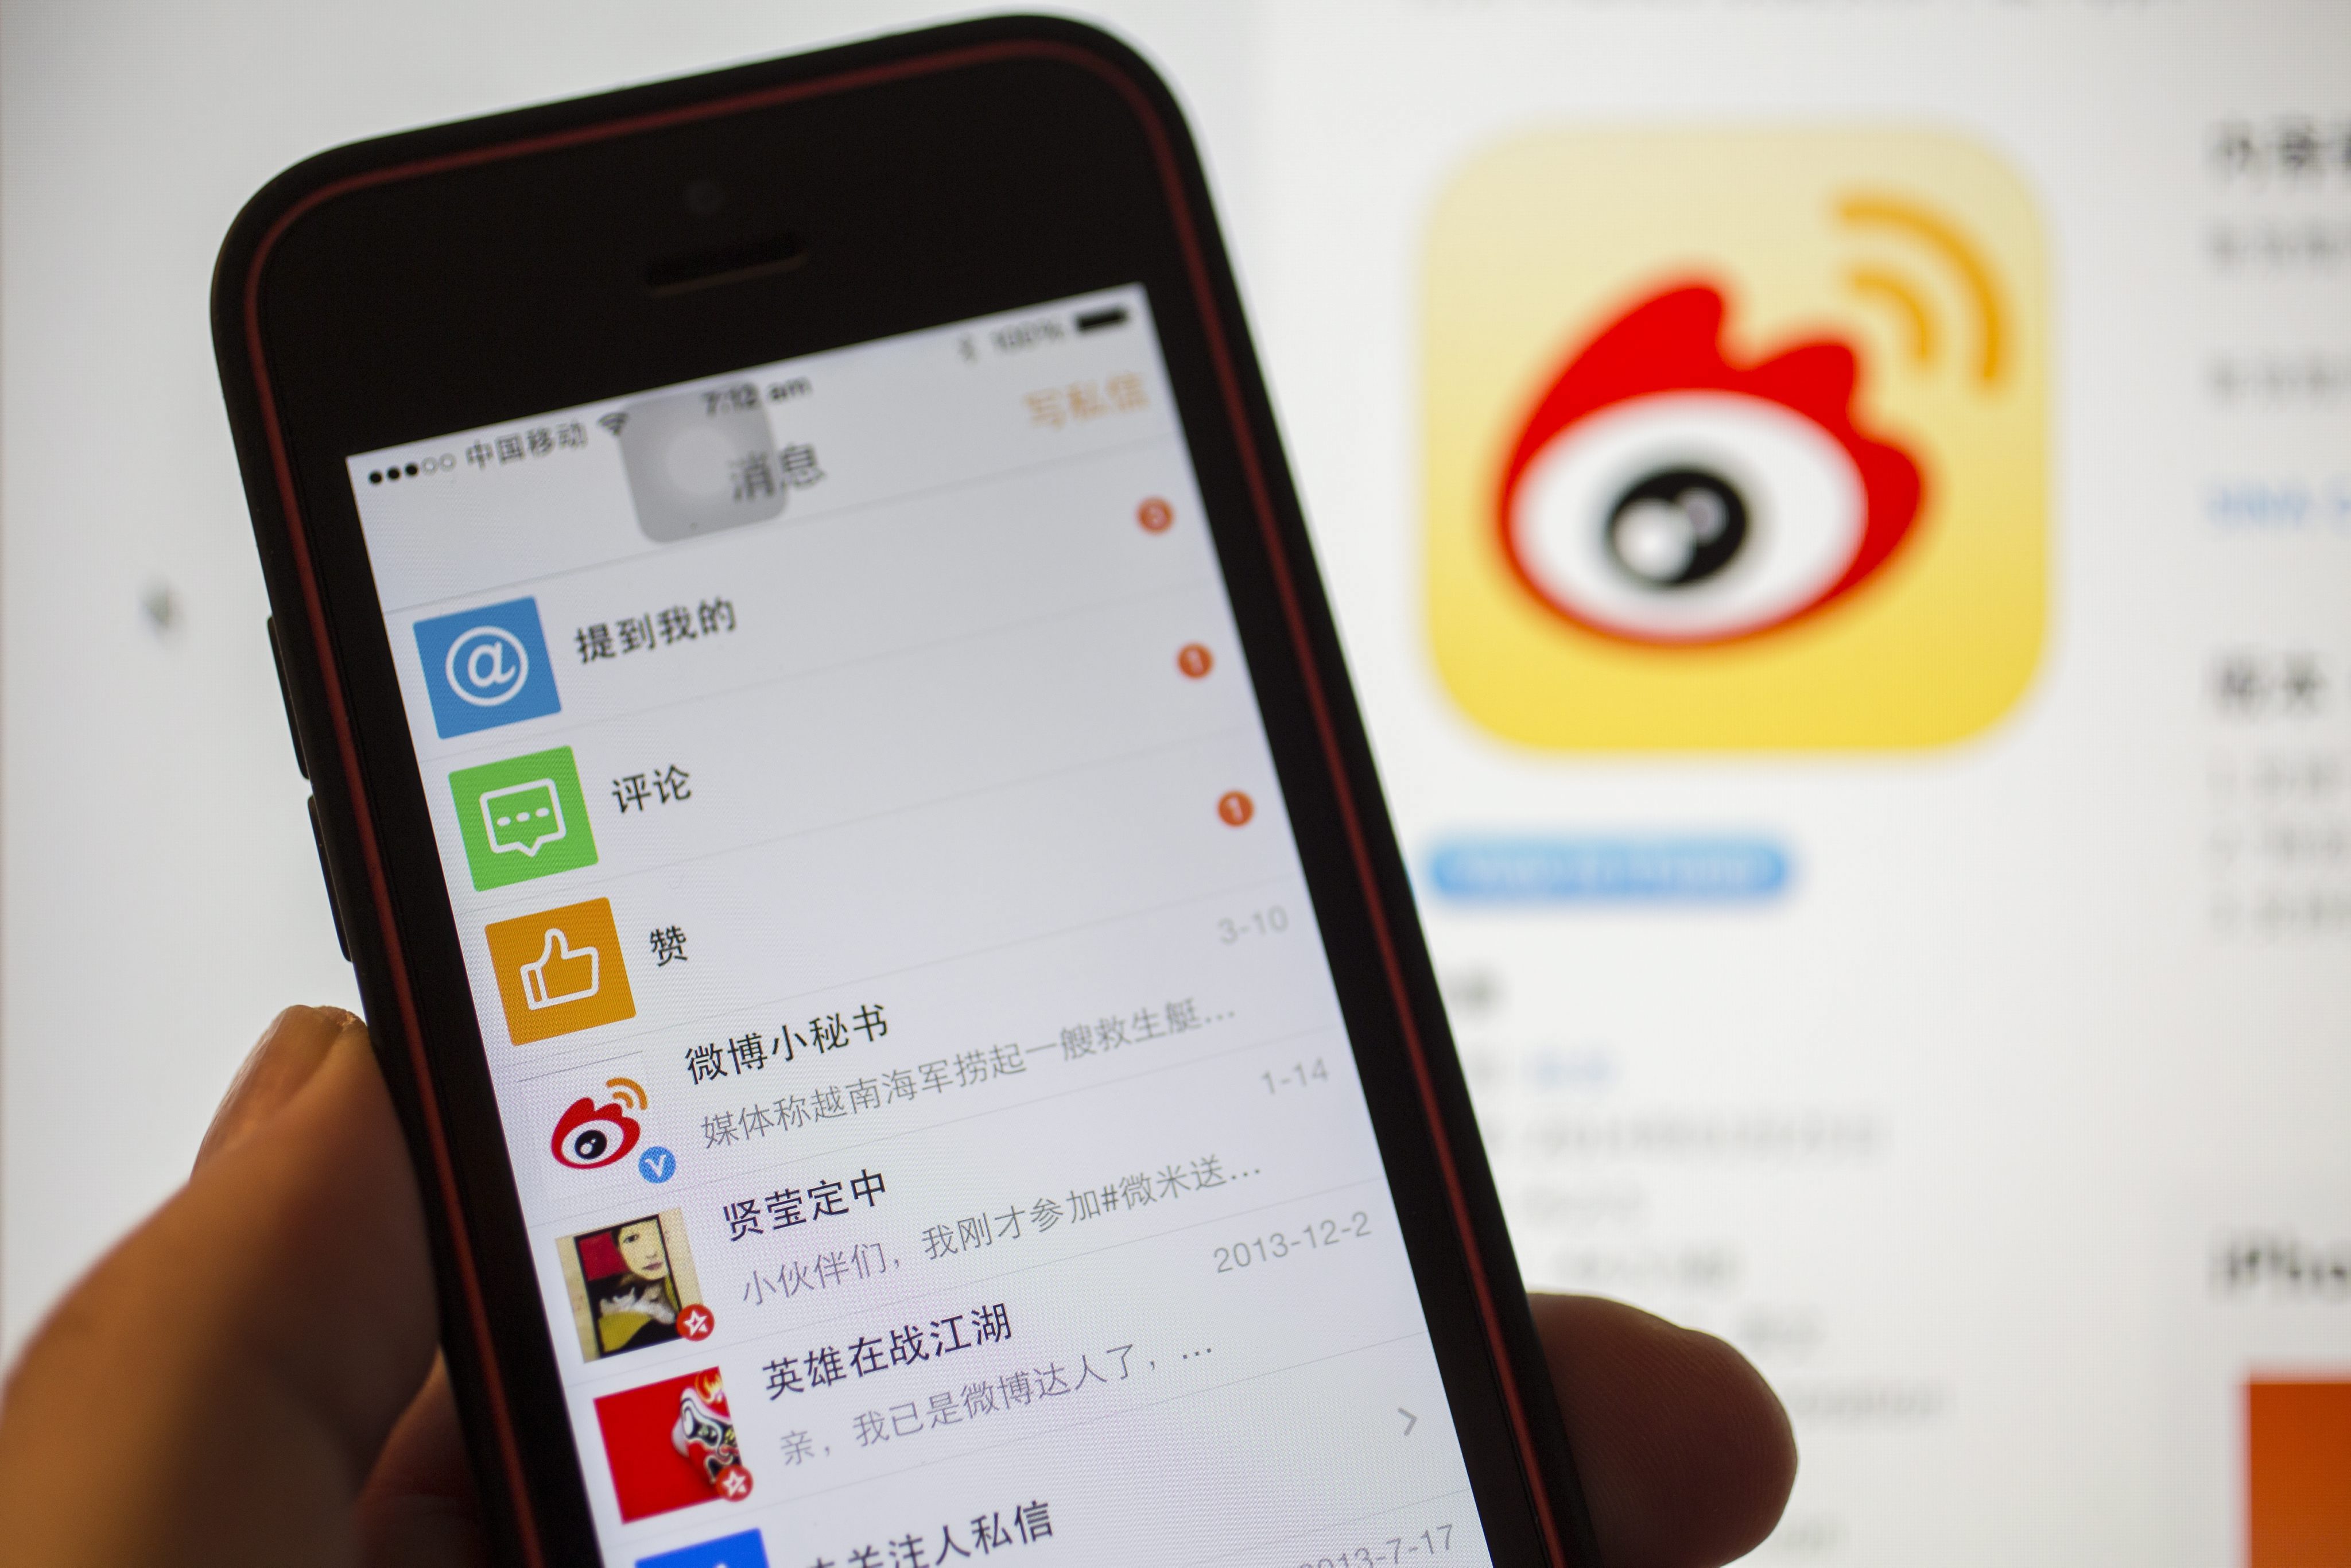 The outlook for Weibo will remain cloudy until it can post a profit and diversify its revenue. Photo: EPA